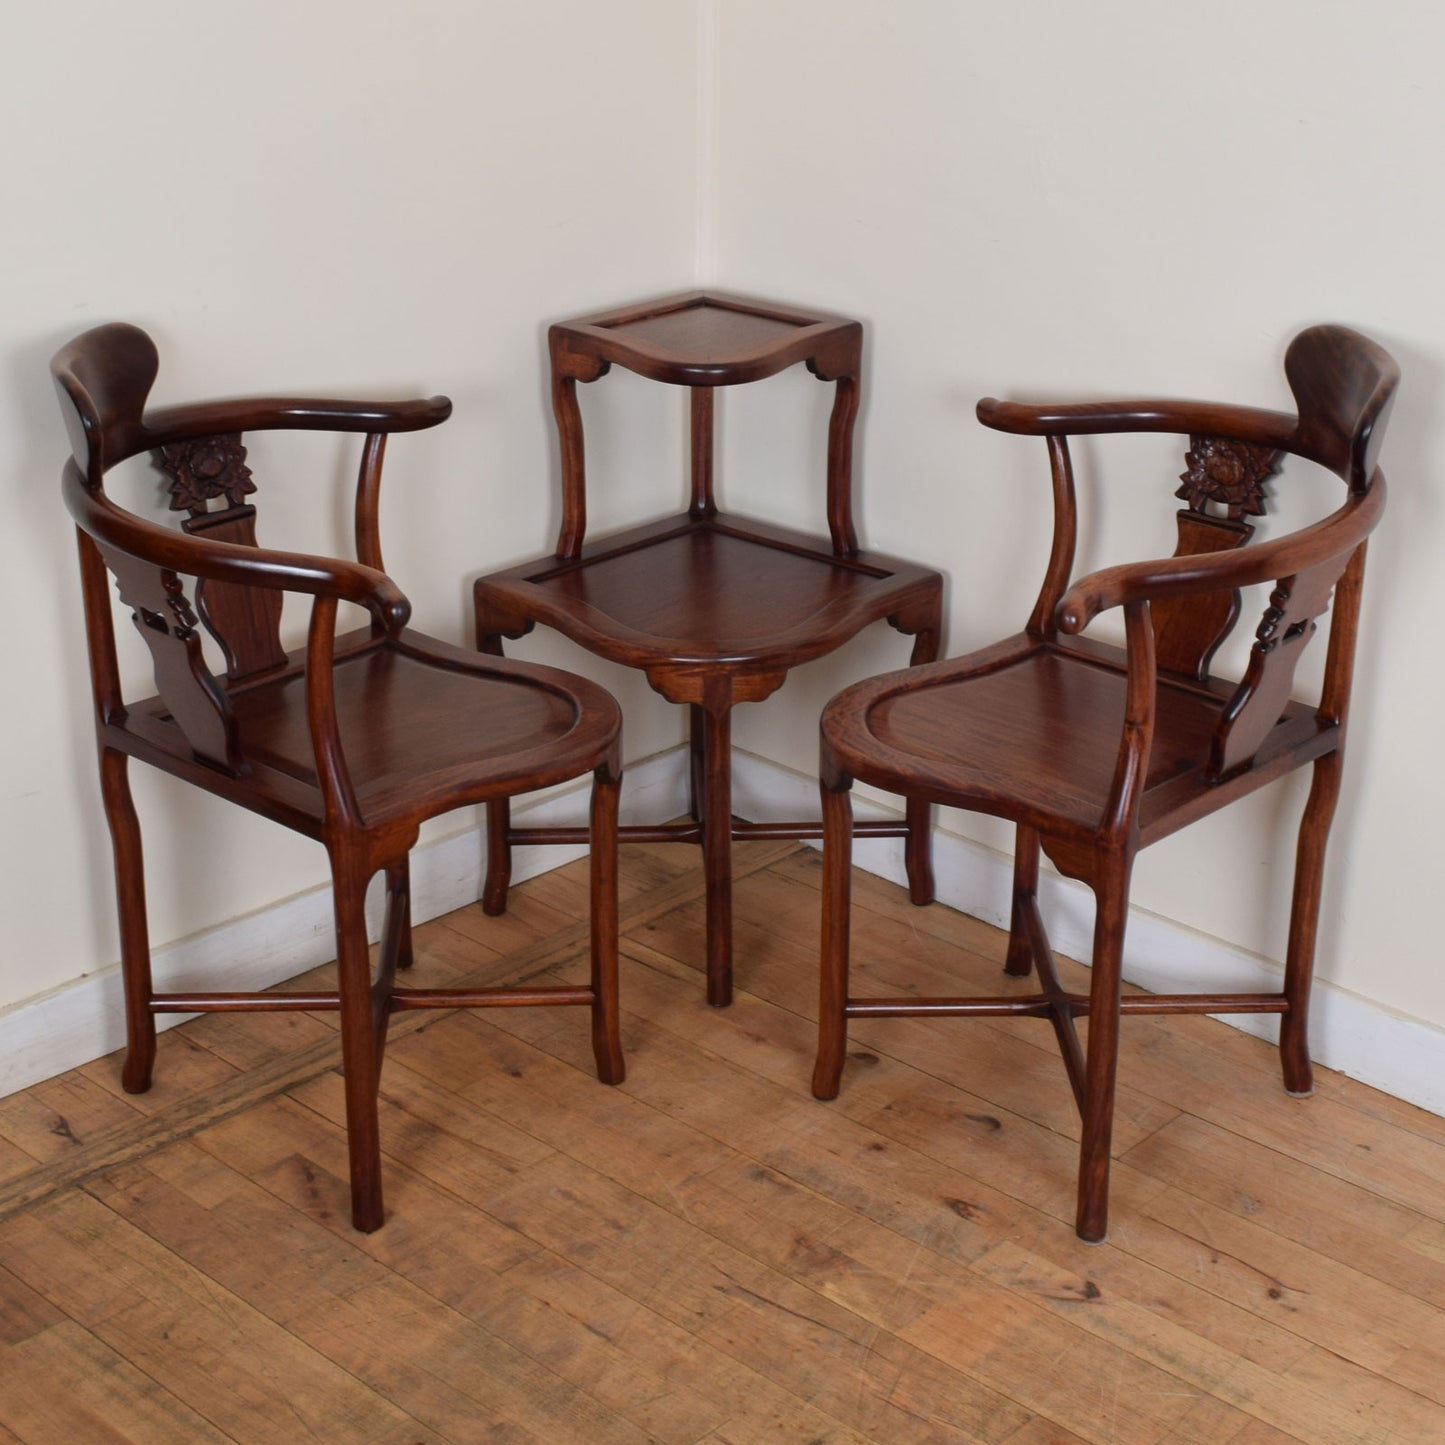 Corner chairs with table